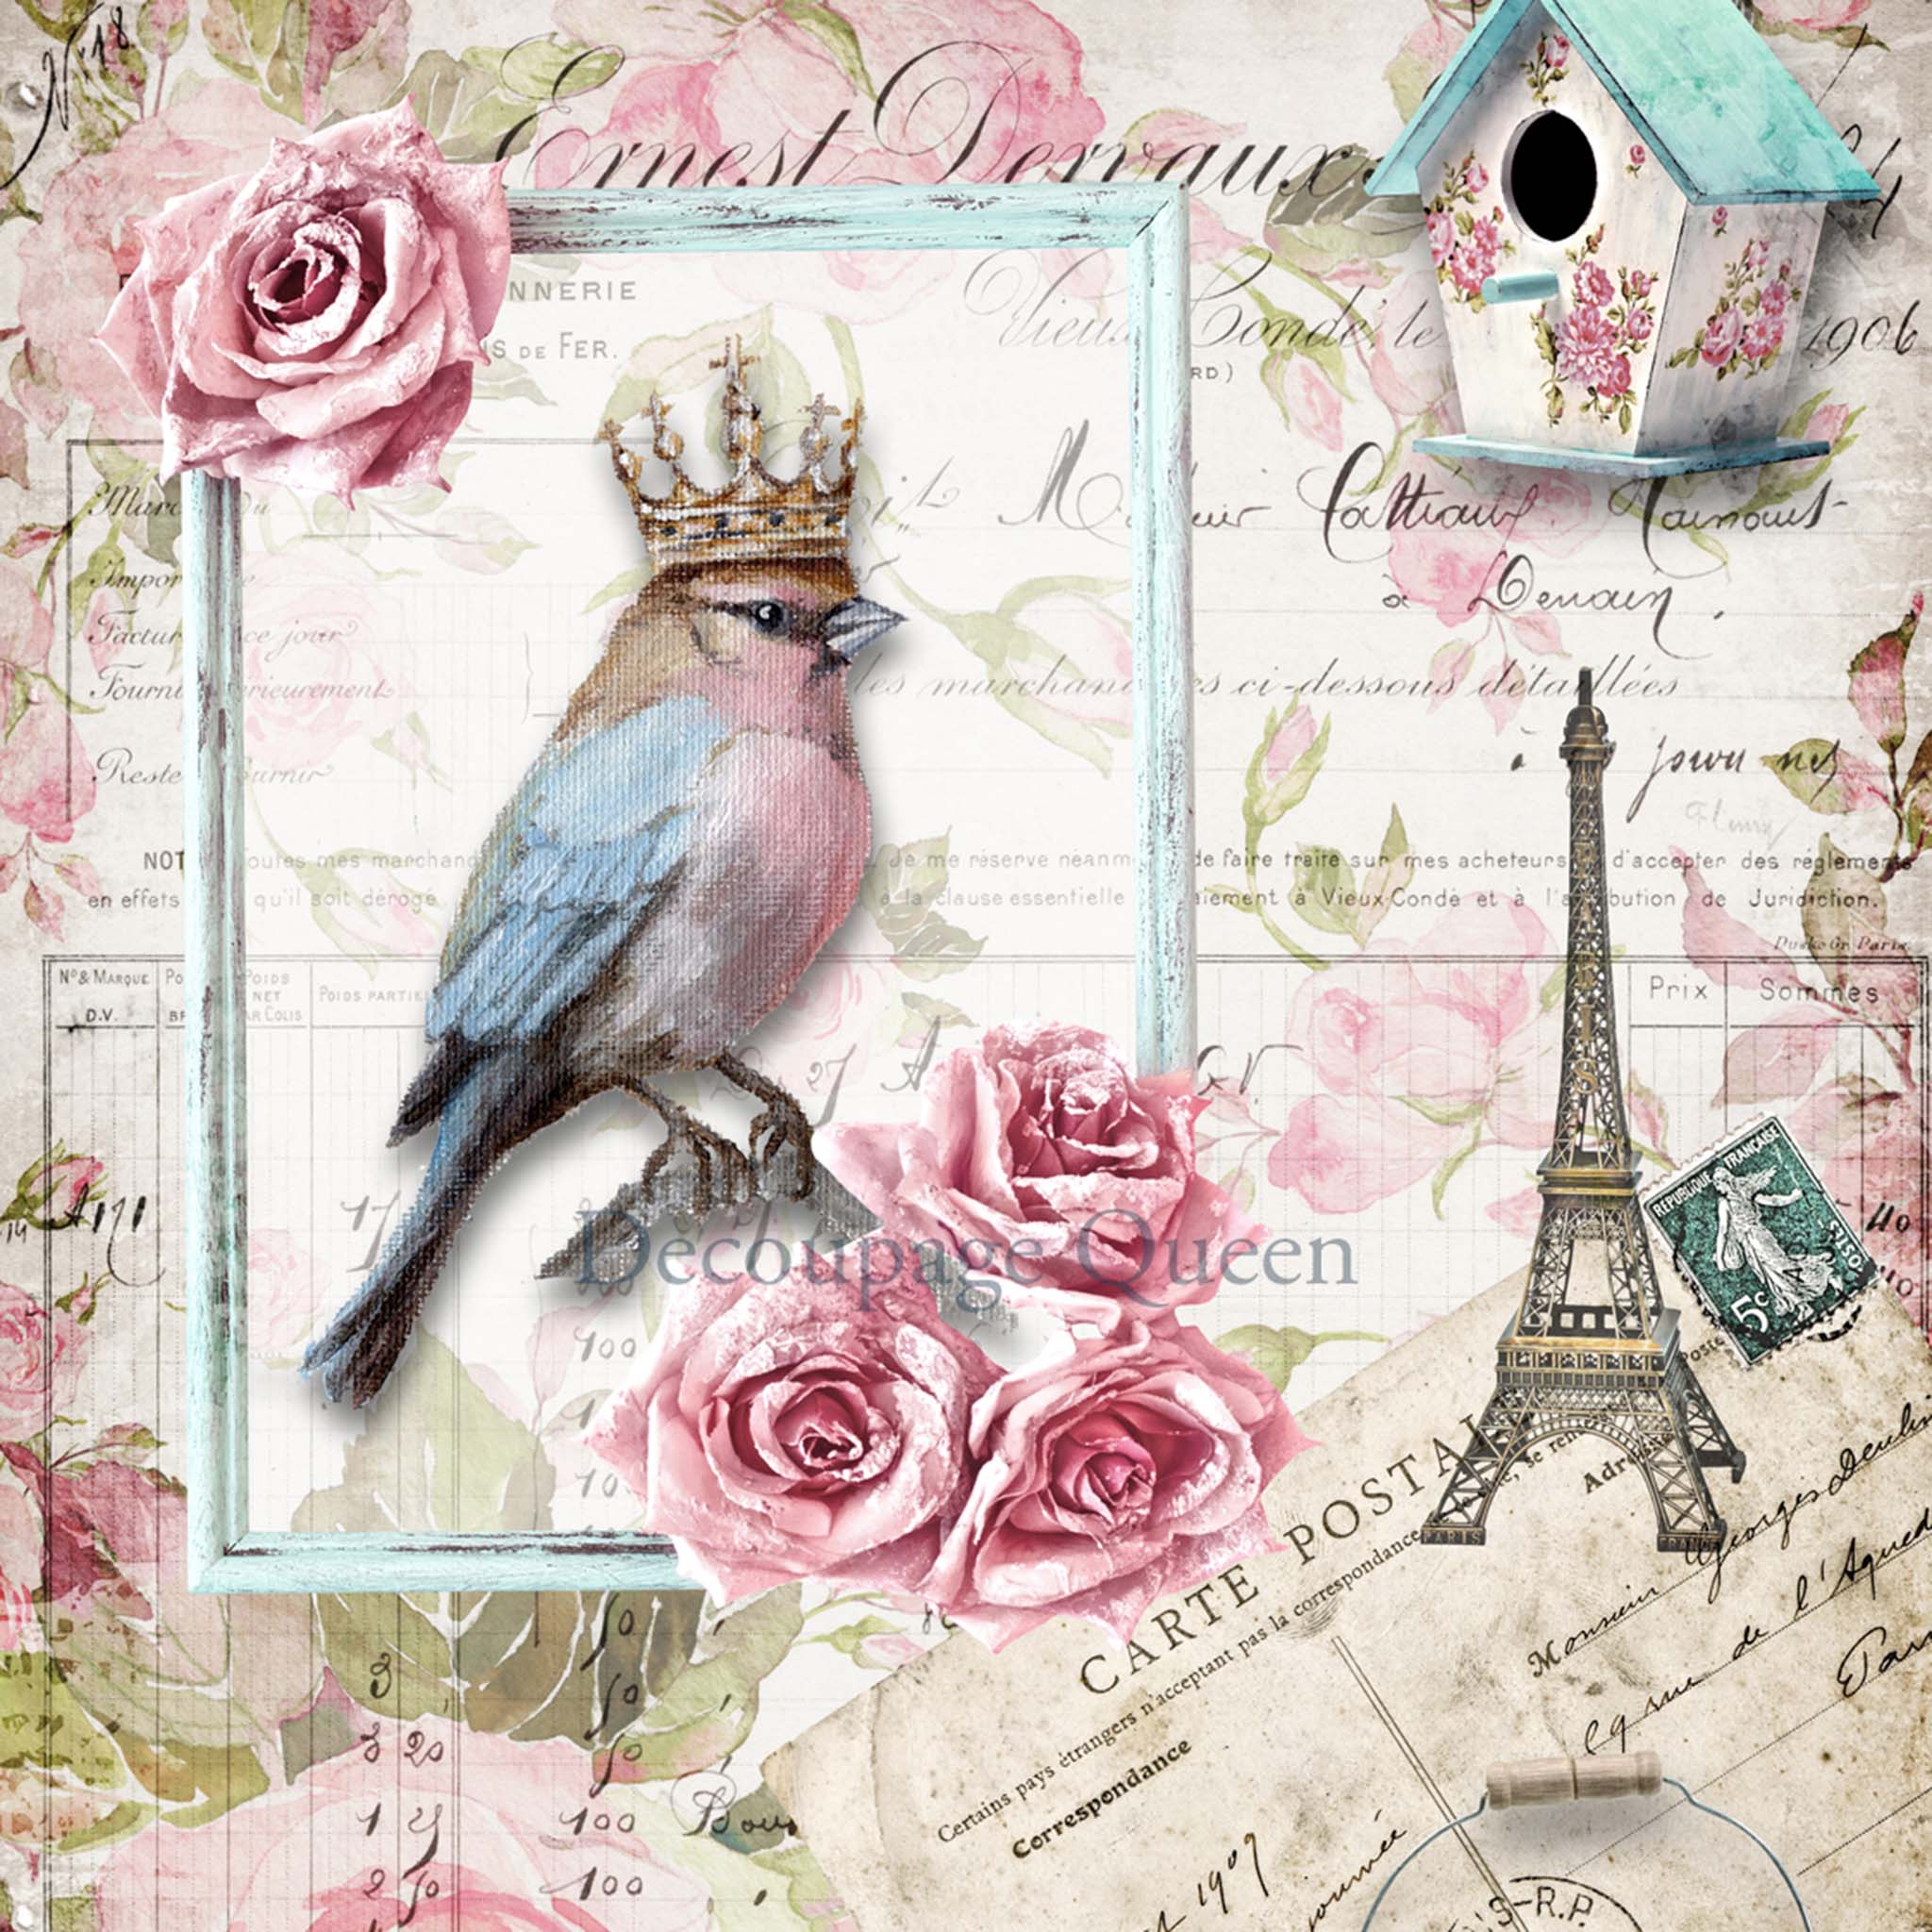 Close-up of an A2 rice paper design that features a small bird wearing a crown perched in a picture frame, surrounded by iconic Parisian elements like the Eiffel Tower, a birdhouse, and a French postcard against a floral background.